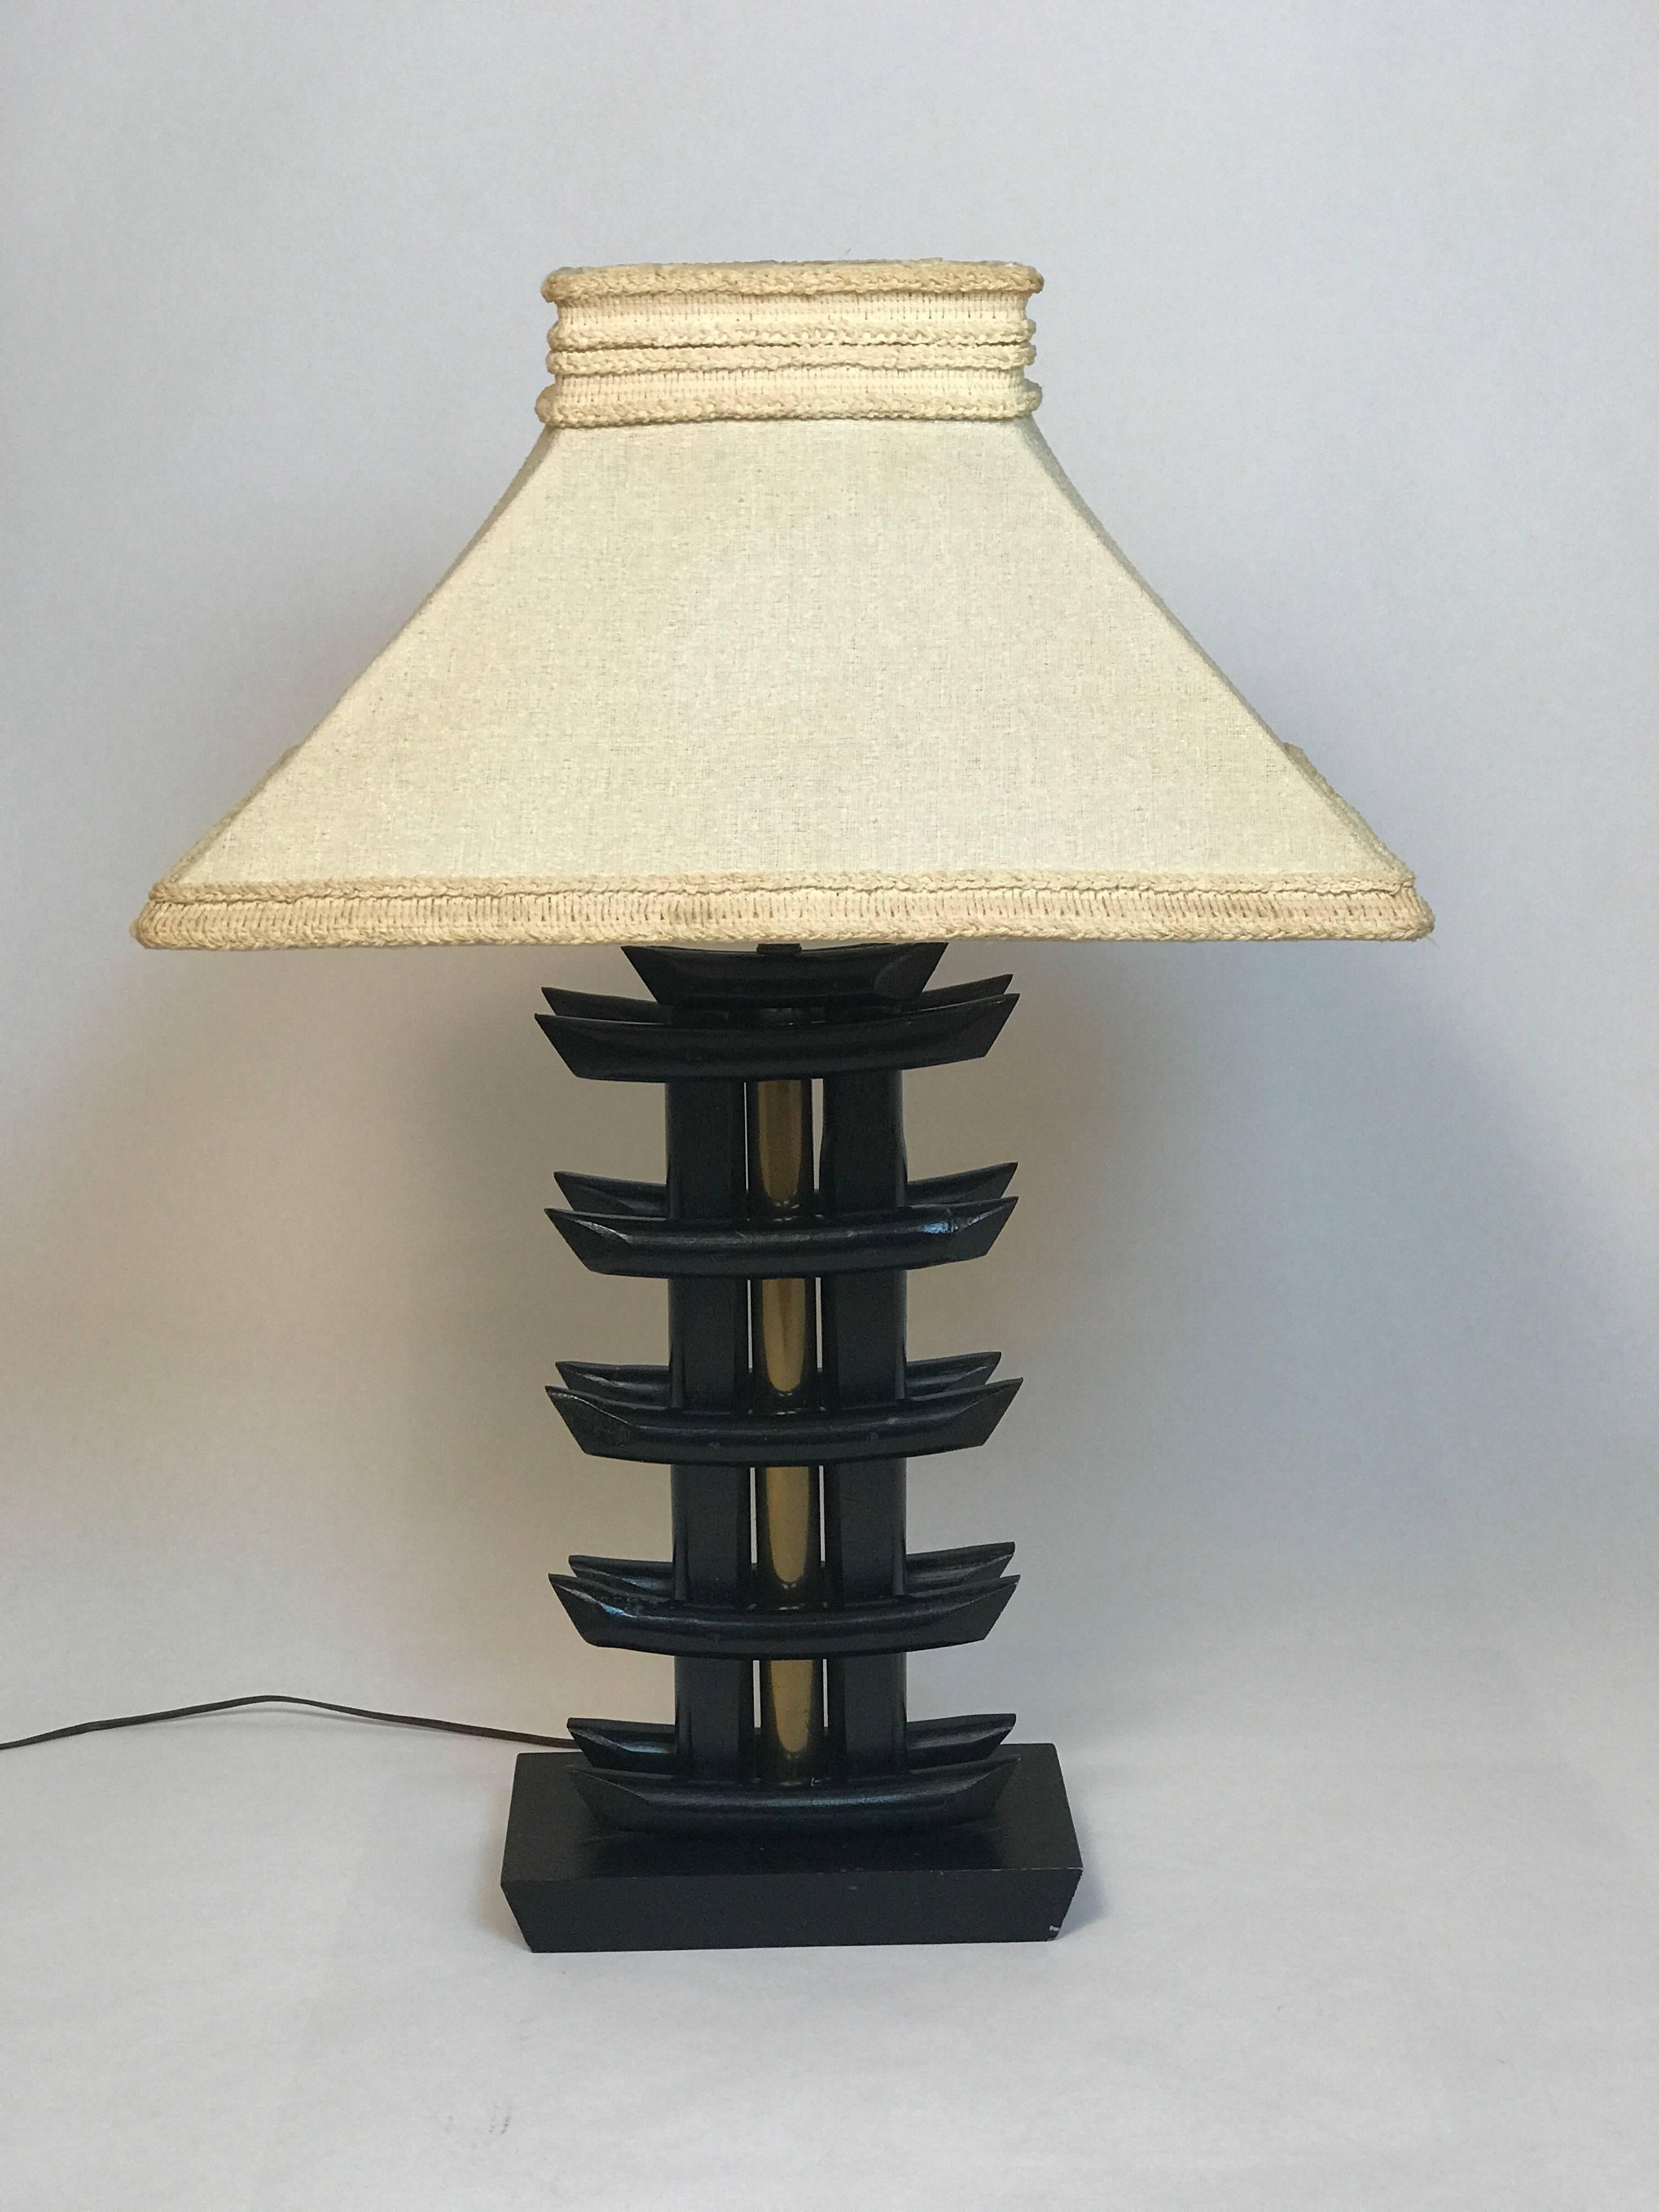 Gorgeous early pair of lamps possibly James Mont. The original ivory color fabric with trim shades are incredible and becoming harder and harder to find in this condition. The base is ebonized solid wood with the body being constructed of ebonized